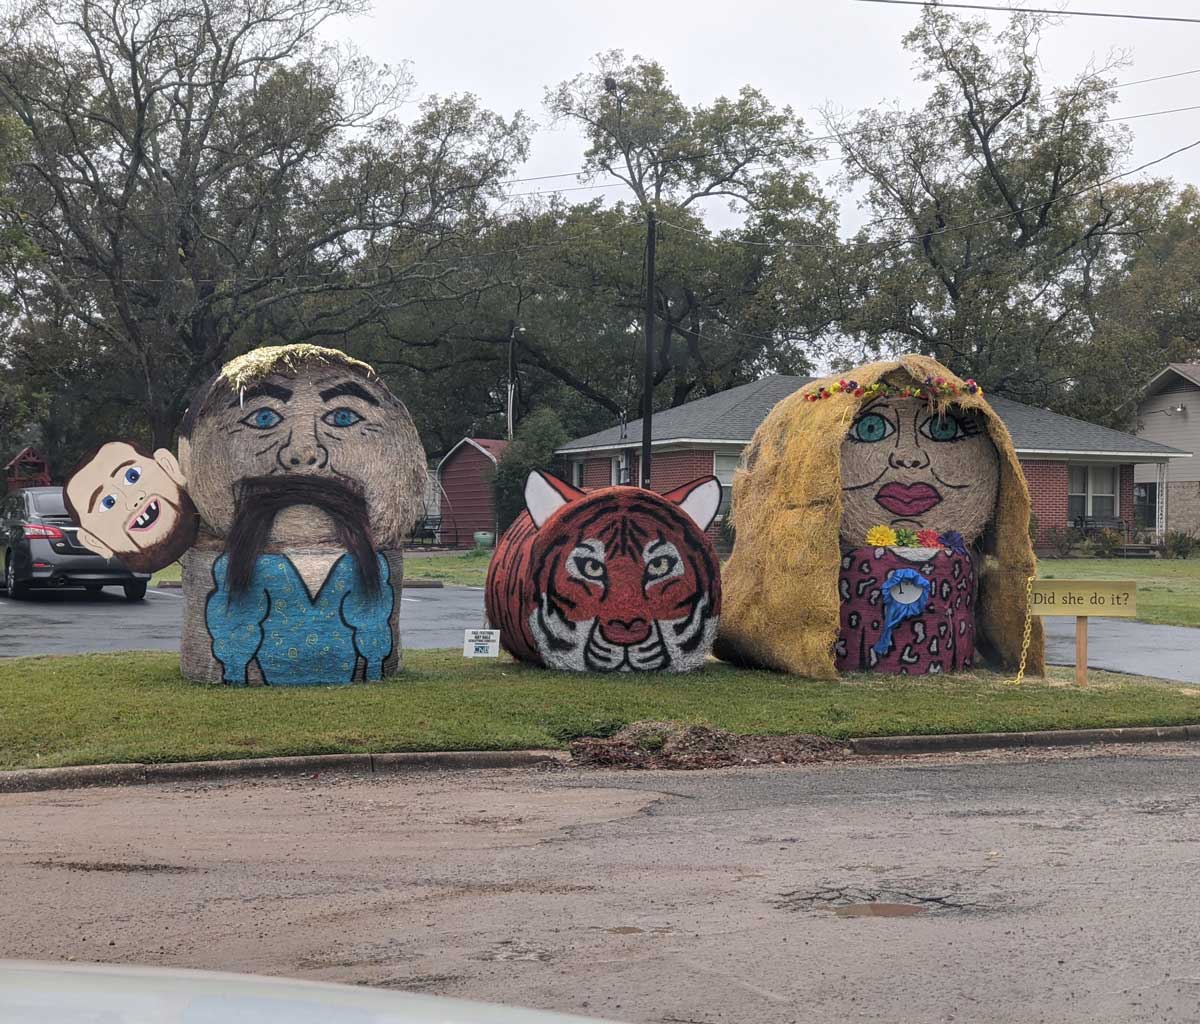 Our town had a hay bale decoration contest for Halloween. This is one of them